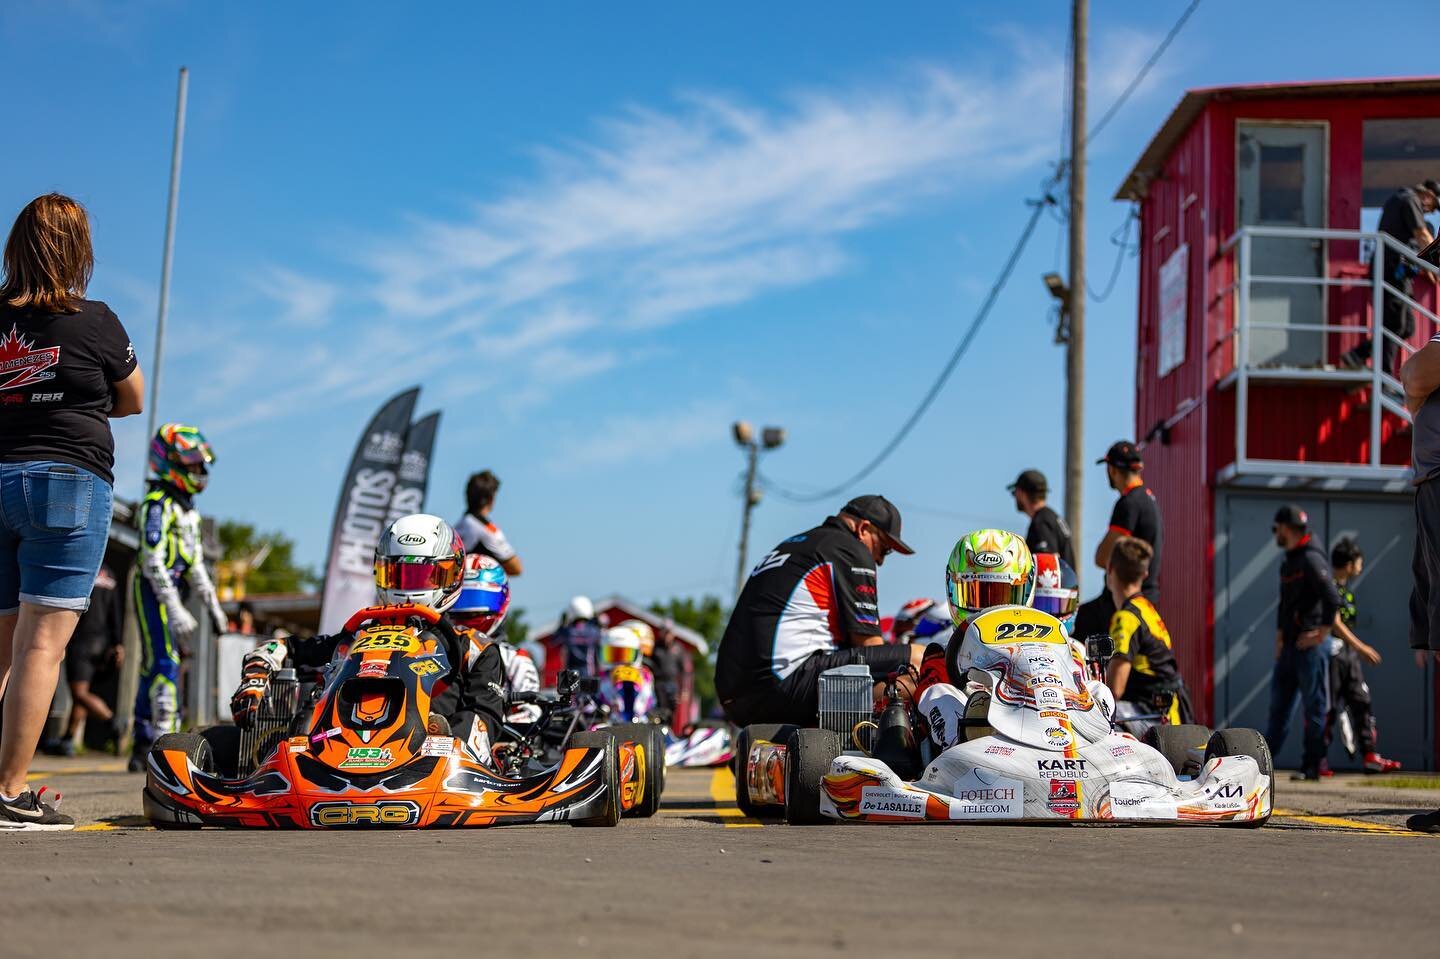 Saturday action in Hamilton @canadianminiindy ☀️
An awesome day at the Canadian Karting Championship! 🏆
Finals tomorrow! Can&rsquo;t wait to see you there!

📸: @gofast_photography